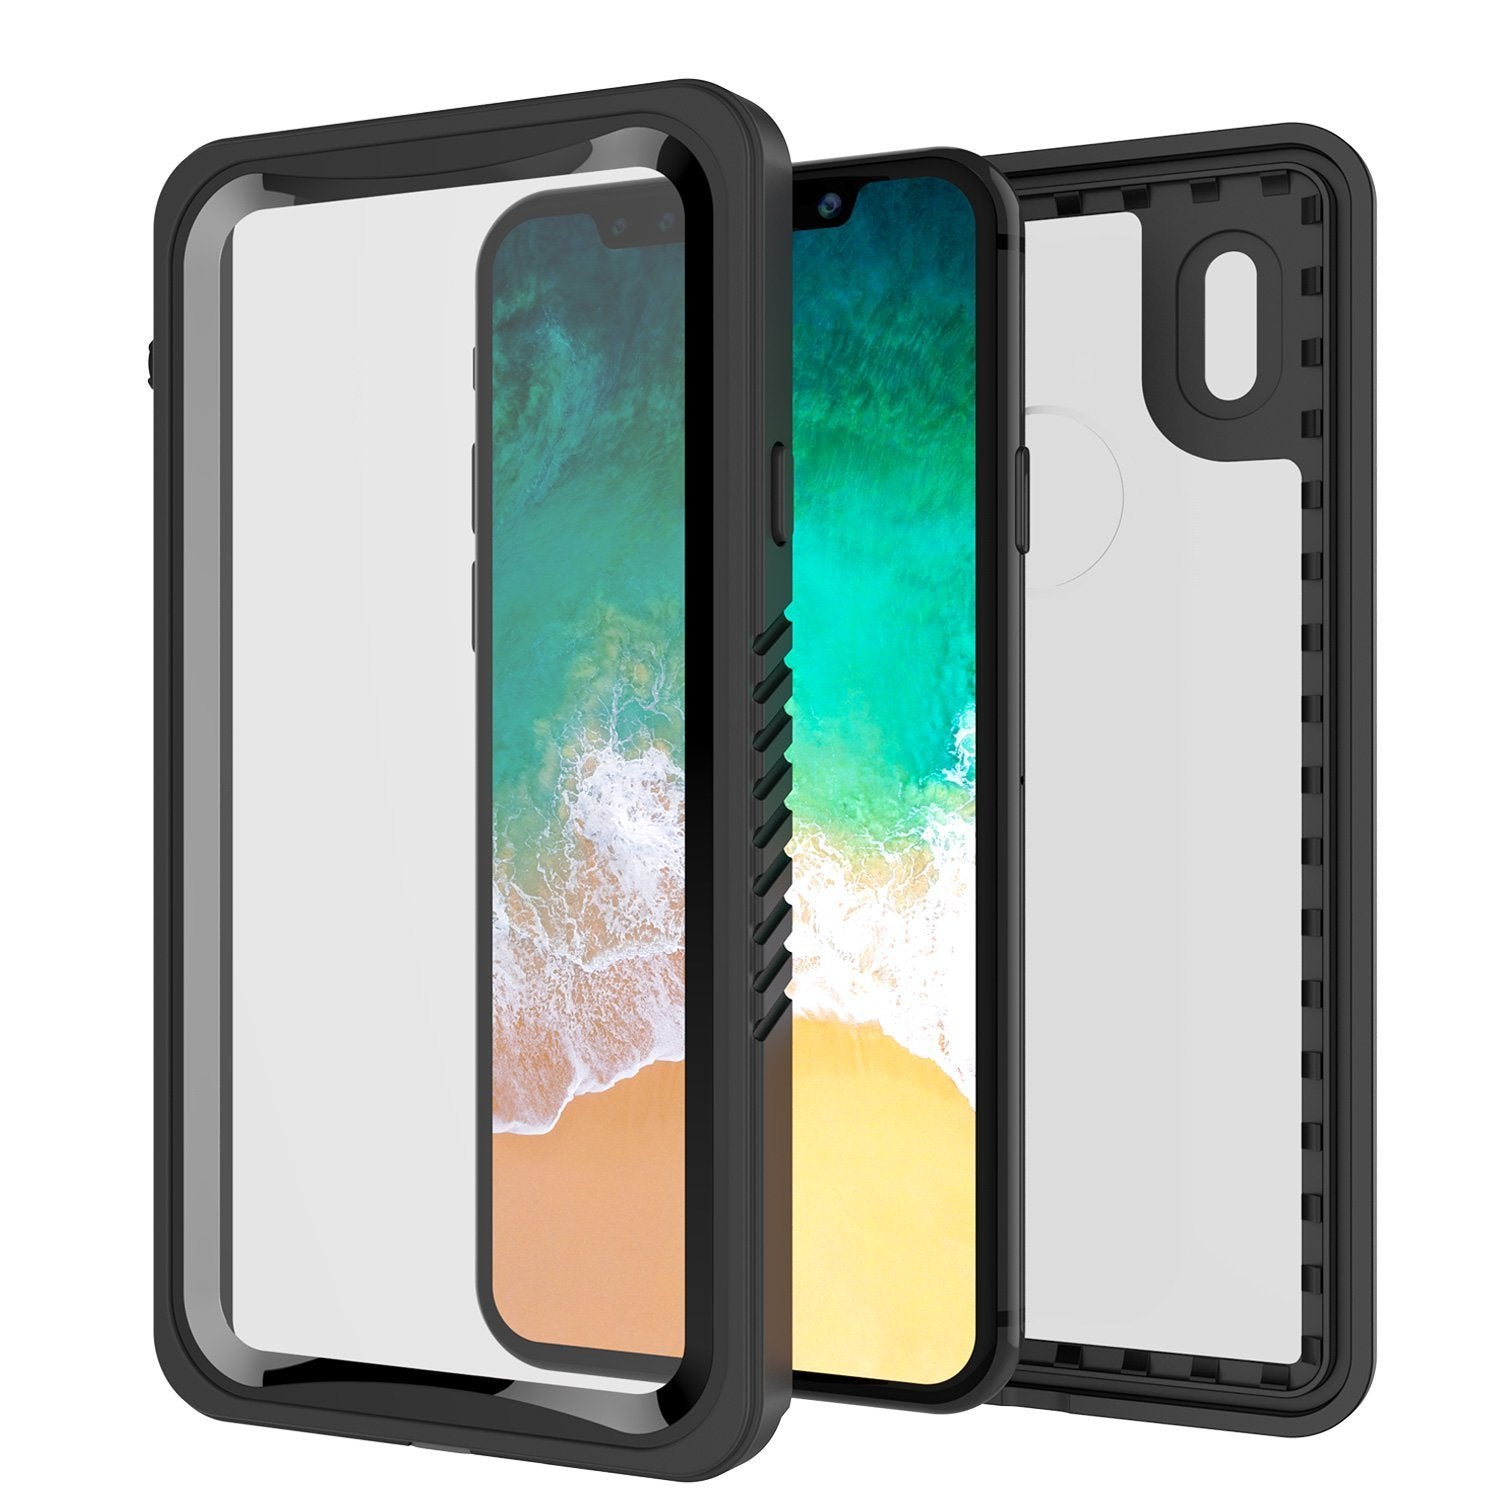 iPhone XS Max Waterproof Case, Punkcase [Extreme Series] Armor Cover W/ Built In Screen Protector [Black] - PunkCase NZ